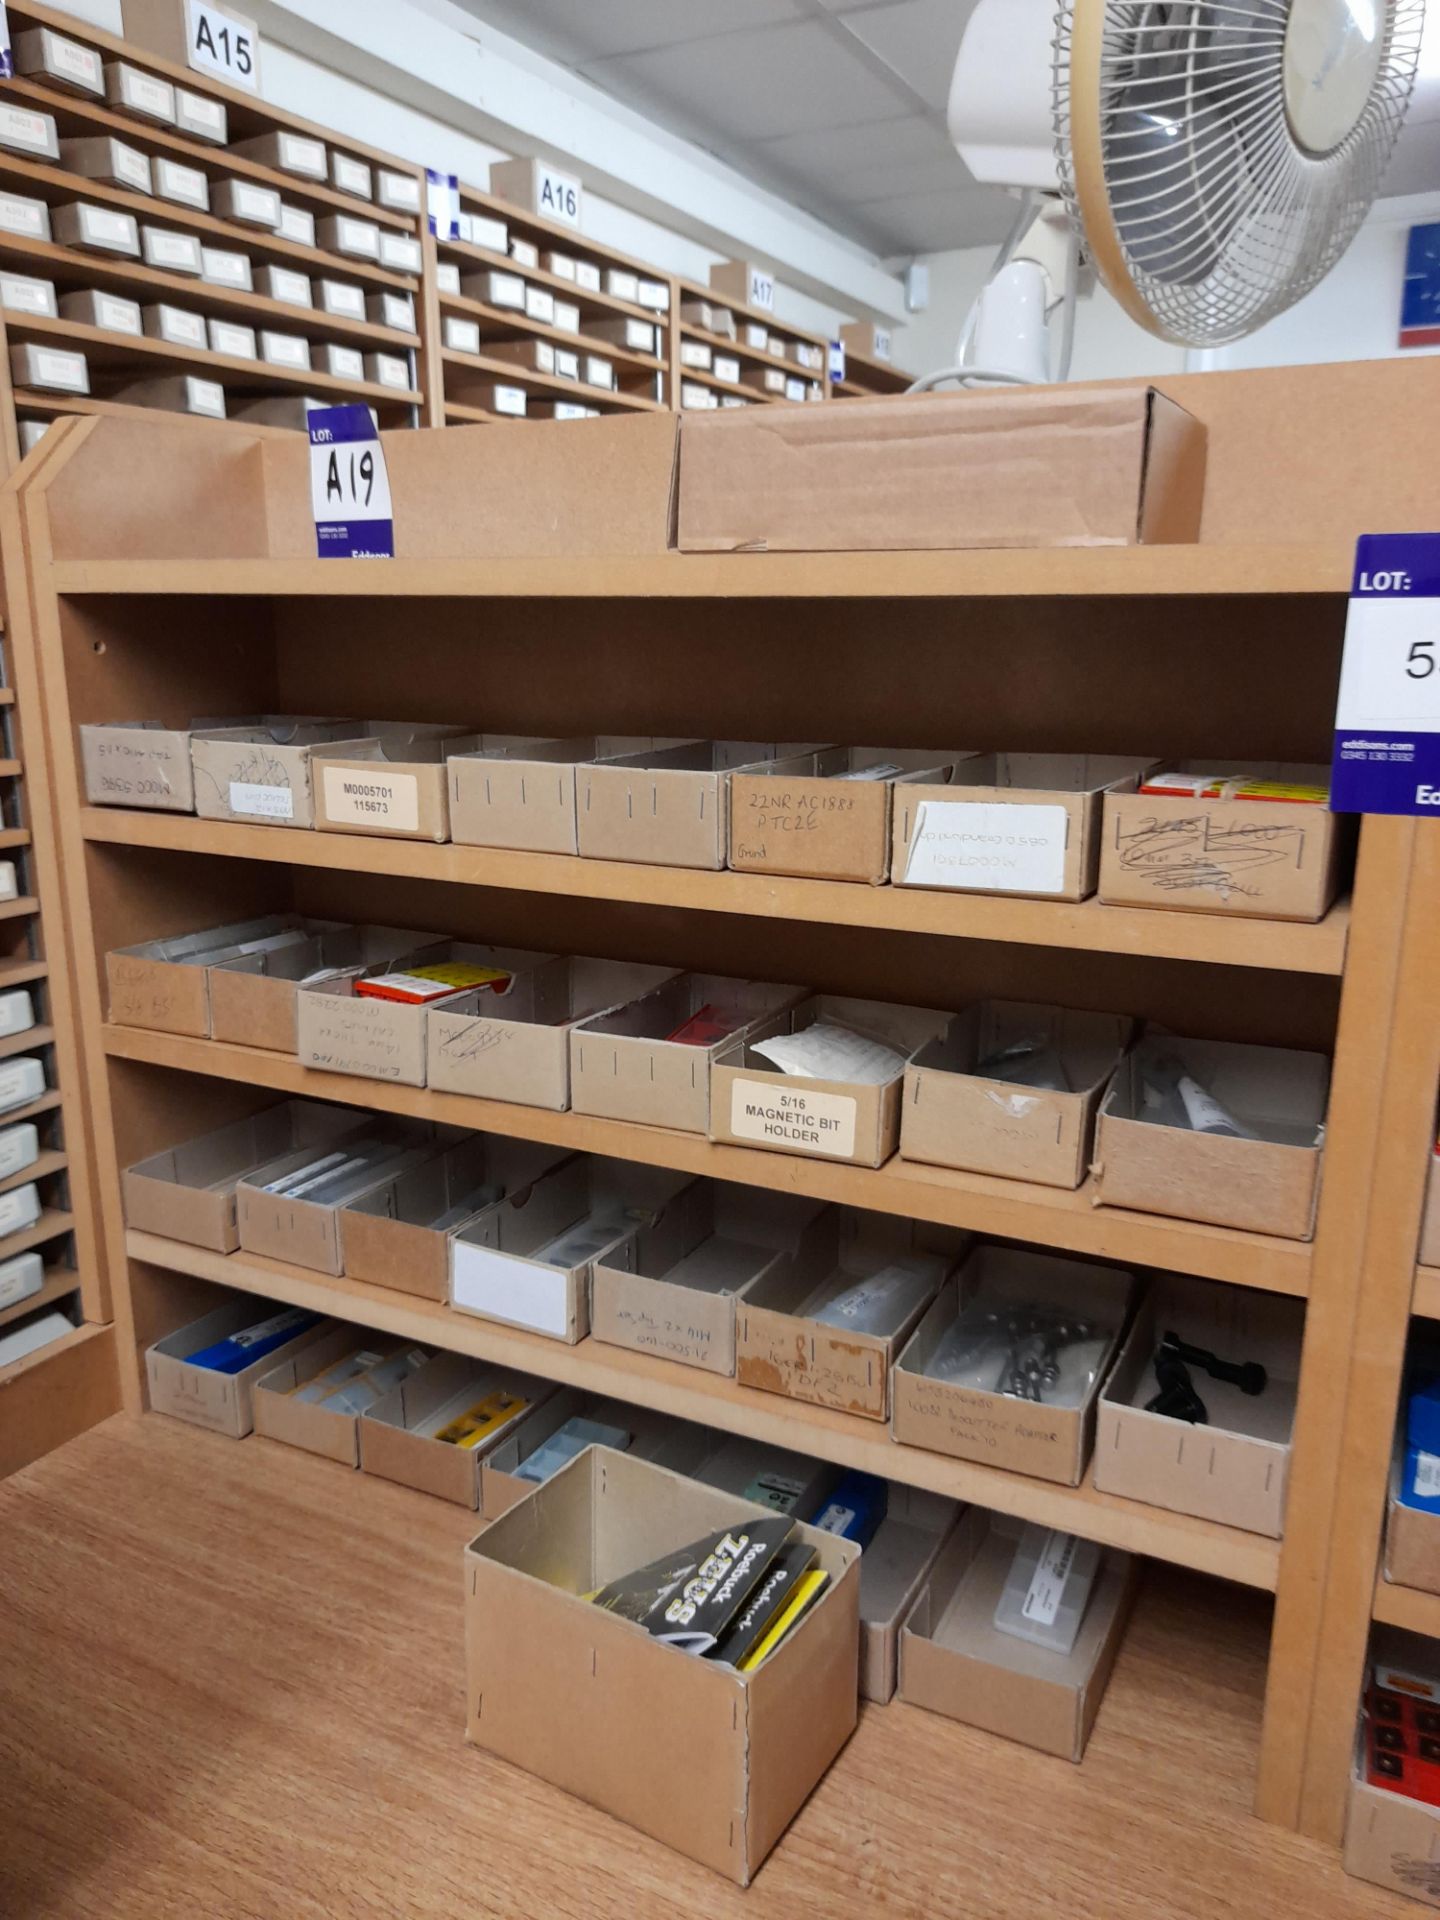 Quantity of various inserts, cutters, machine tools etc., to two bays, Location A19 (Shelving not - Image 2 of 5